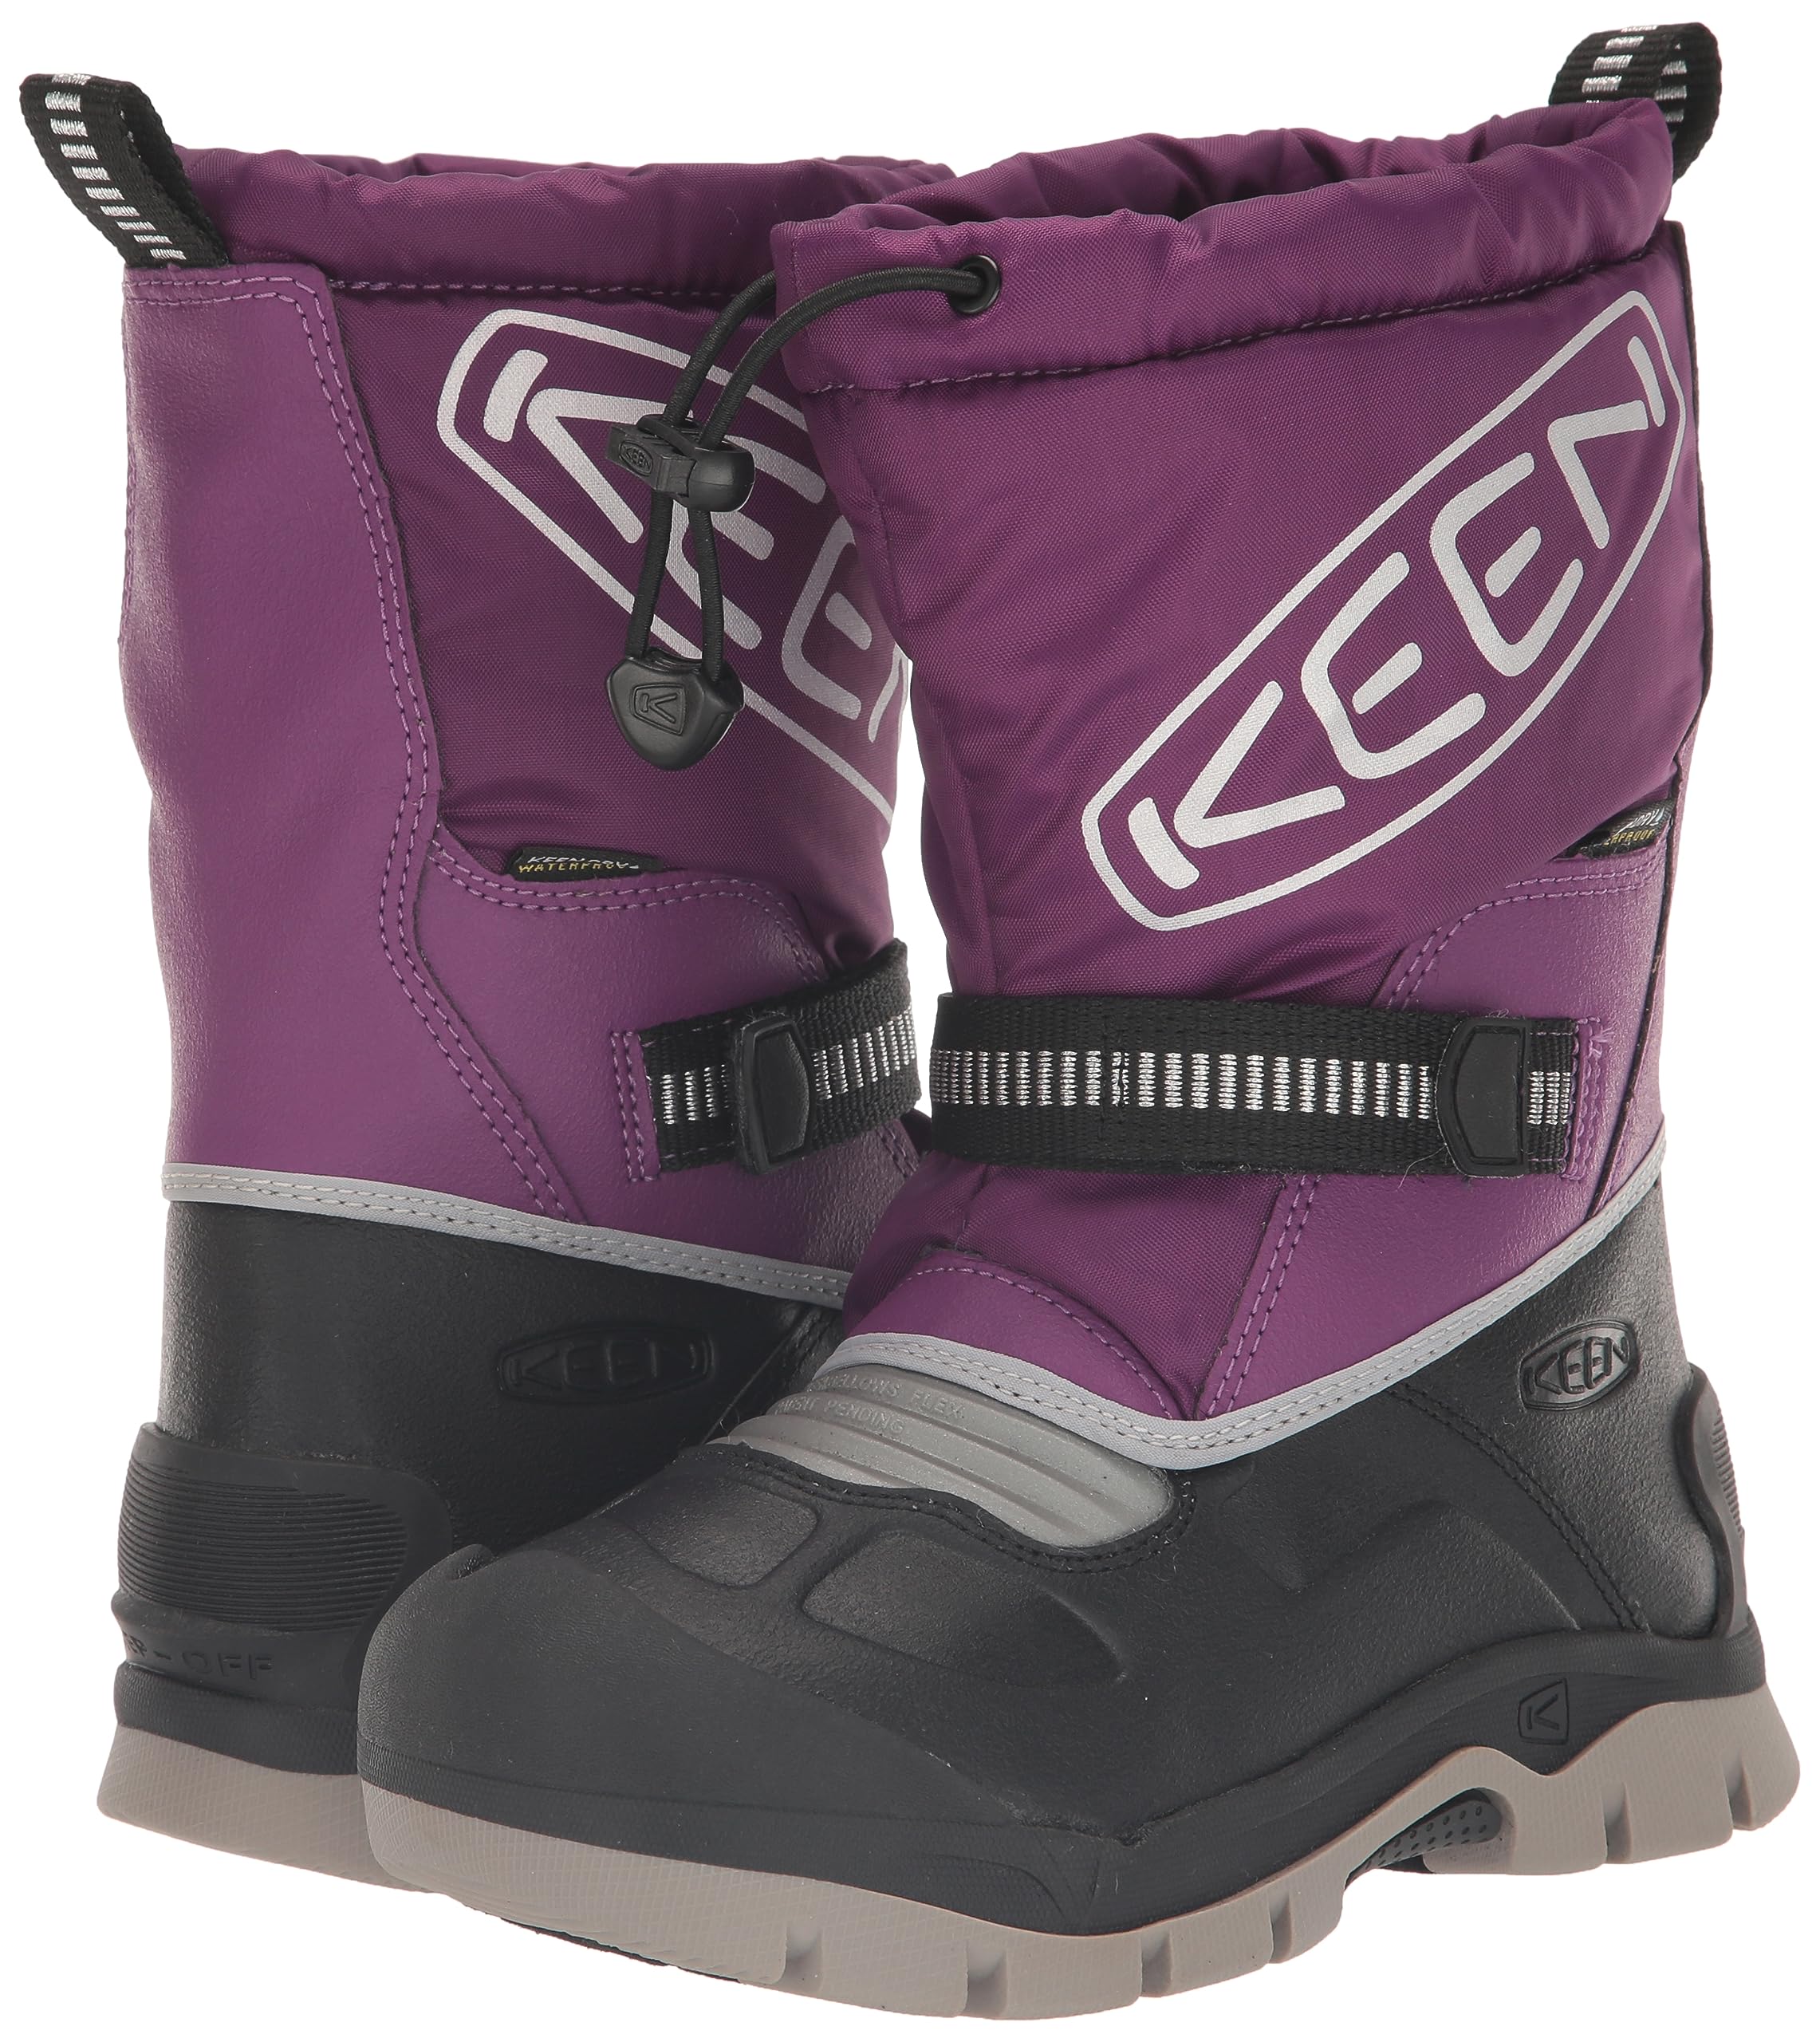 KEEN Unisex-Child Snow Troll Insulated Waterproof Pull on Winter Boots